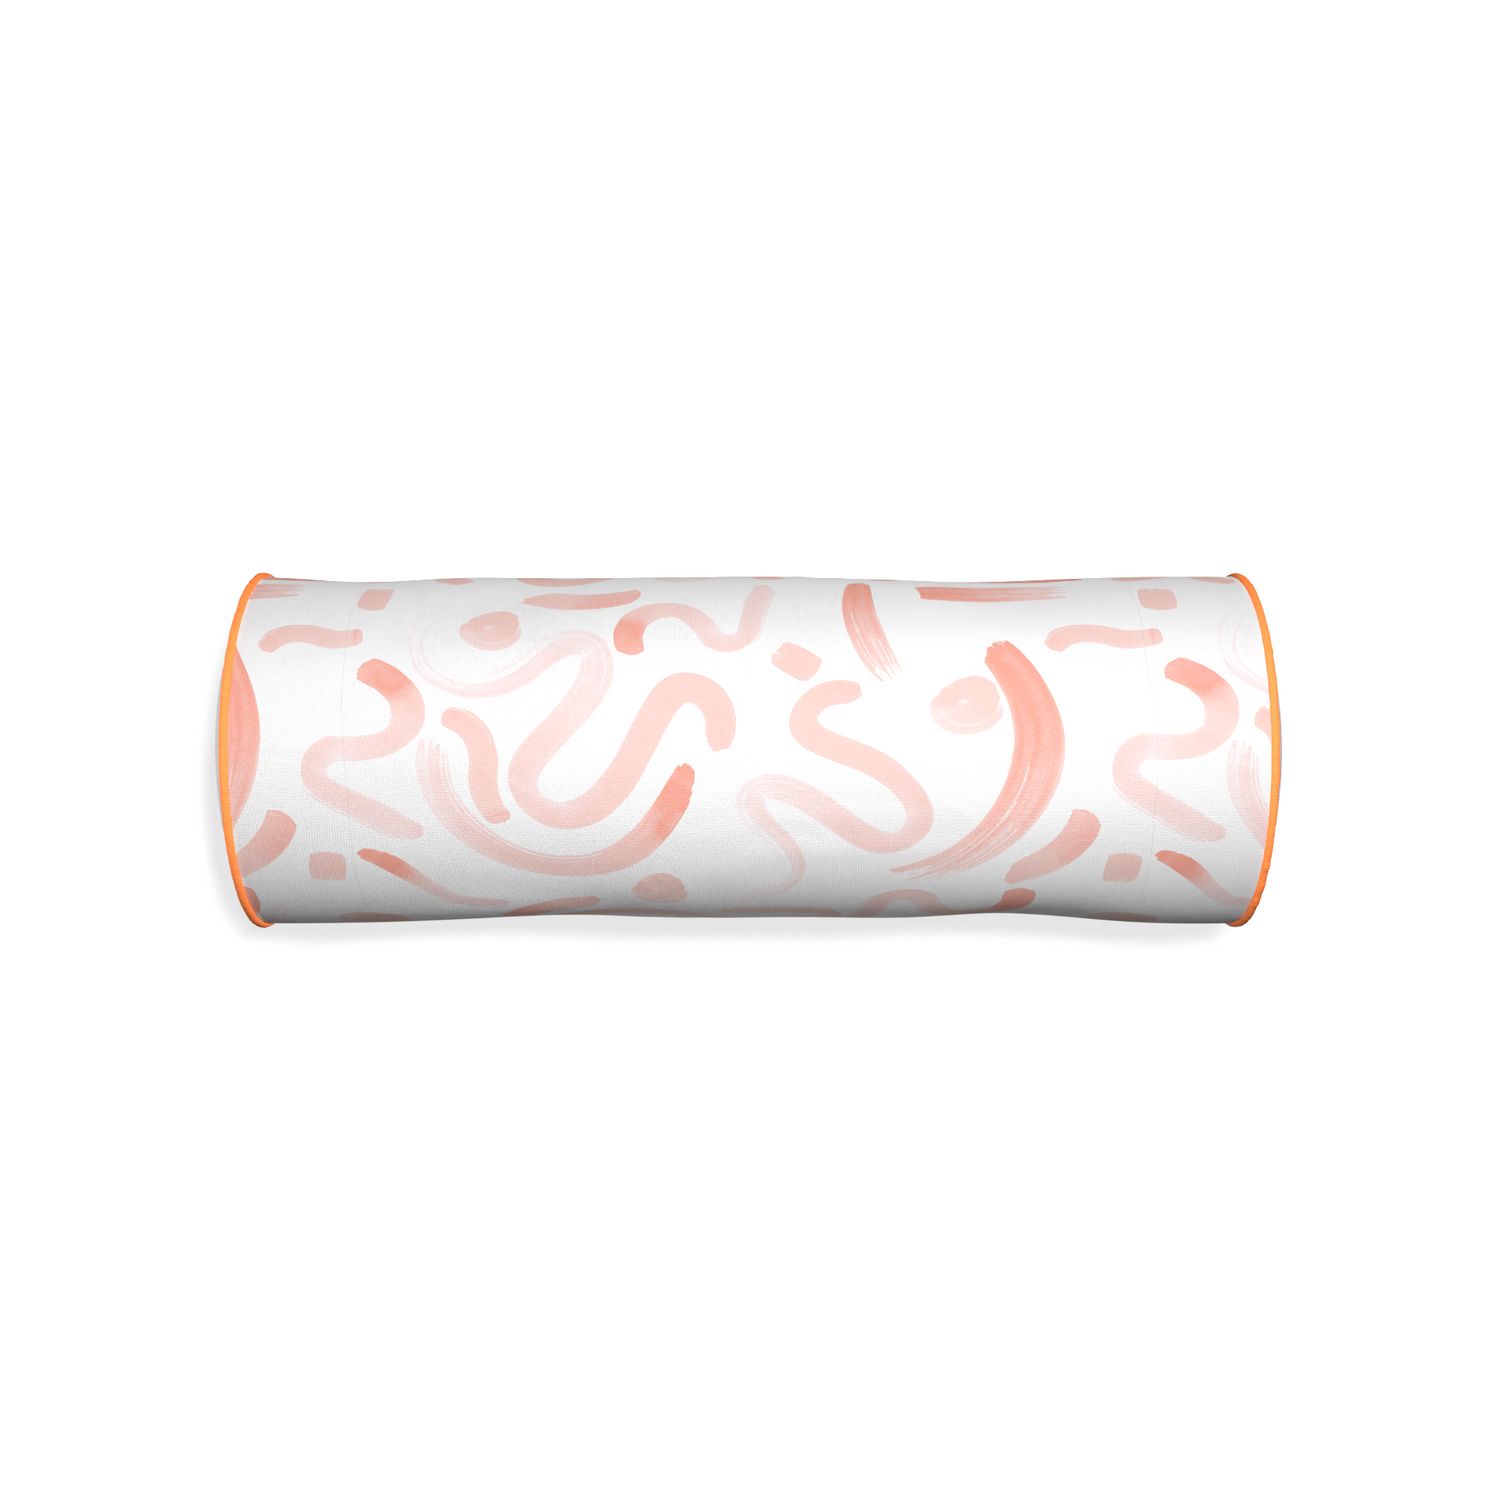 Bolster hockney pink custom pink graphicpillow with clementine piping on white background